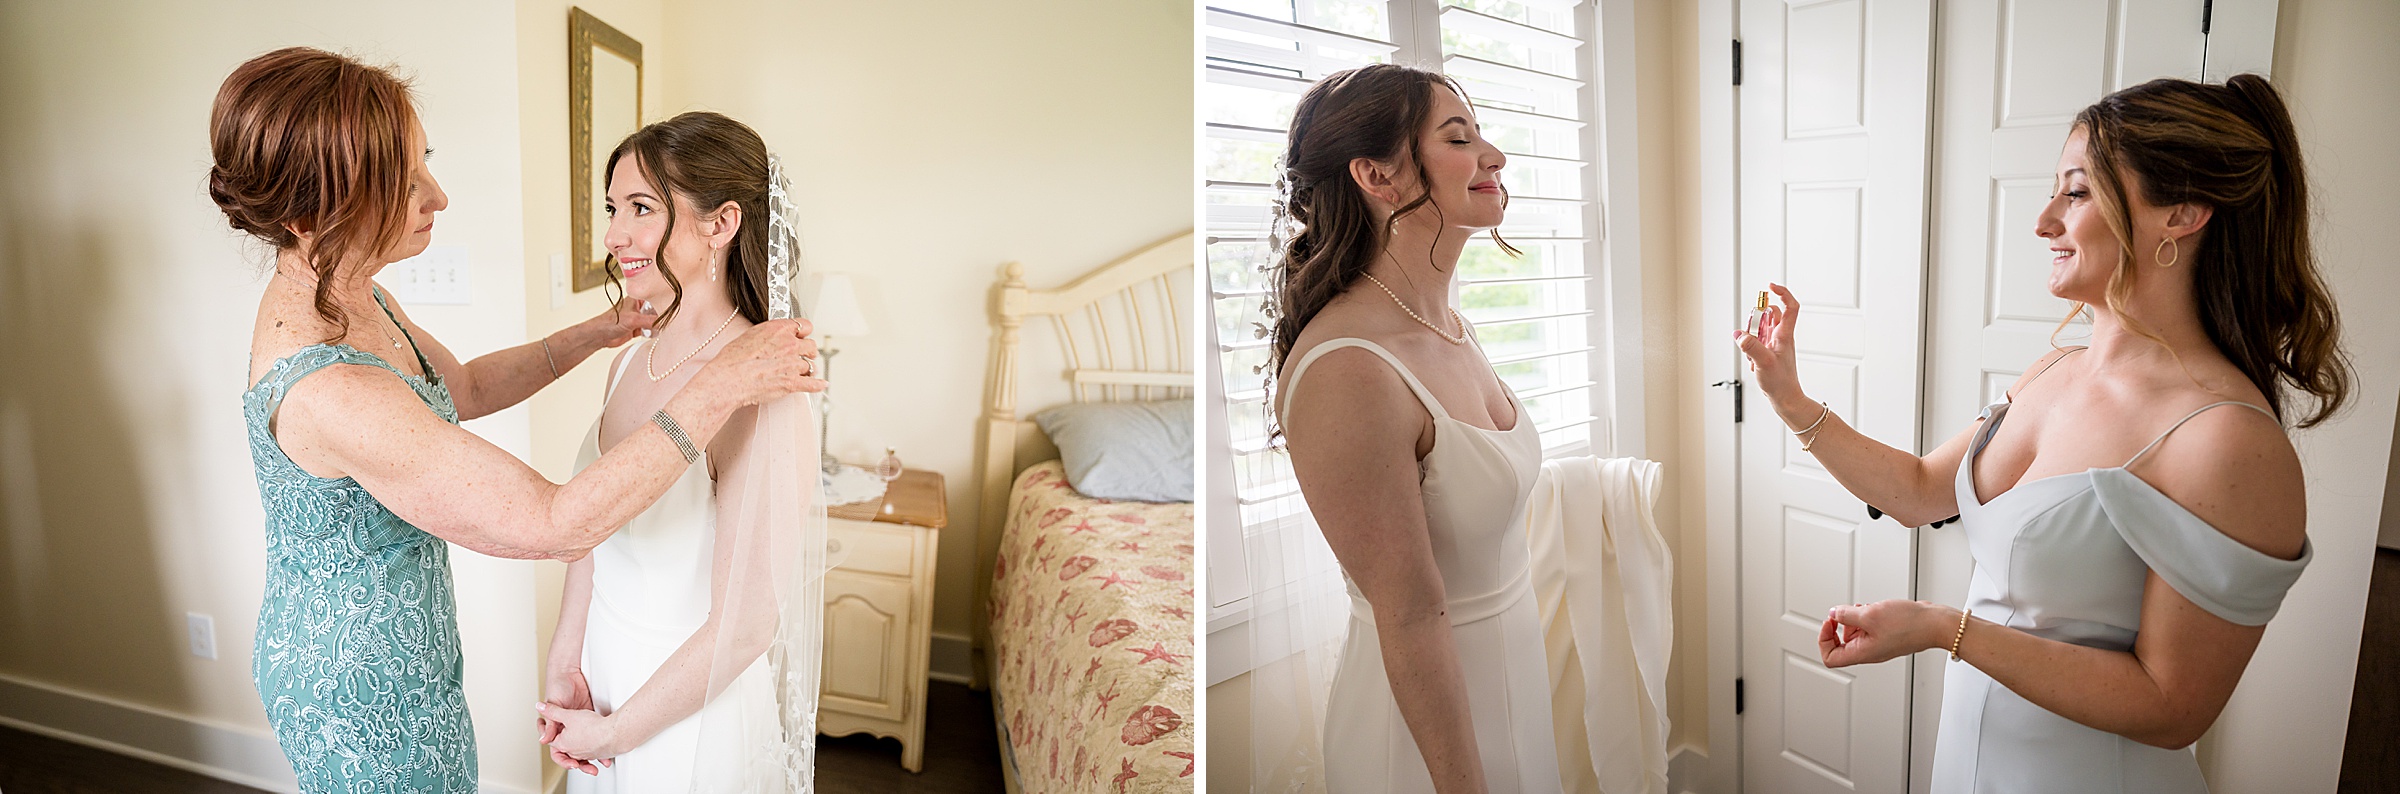 Two images of a bride preparing for her wedding. Left: A woman adjusts the bride's veil in a bedroom. Right: Another woman sprays perfume on the bride near a window.